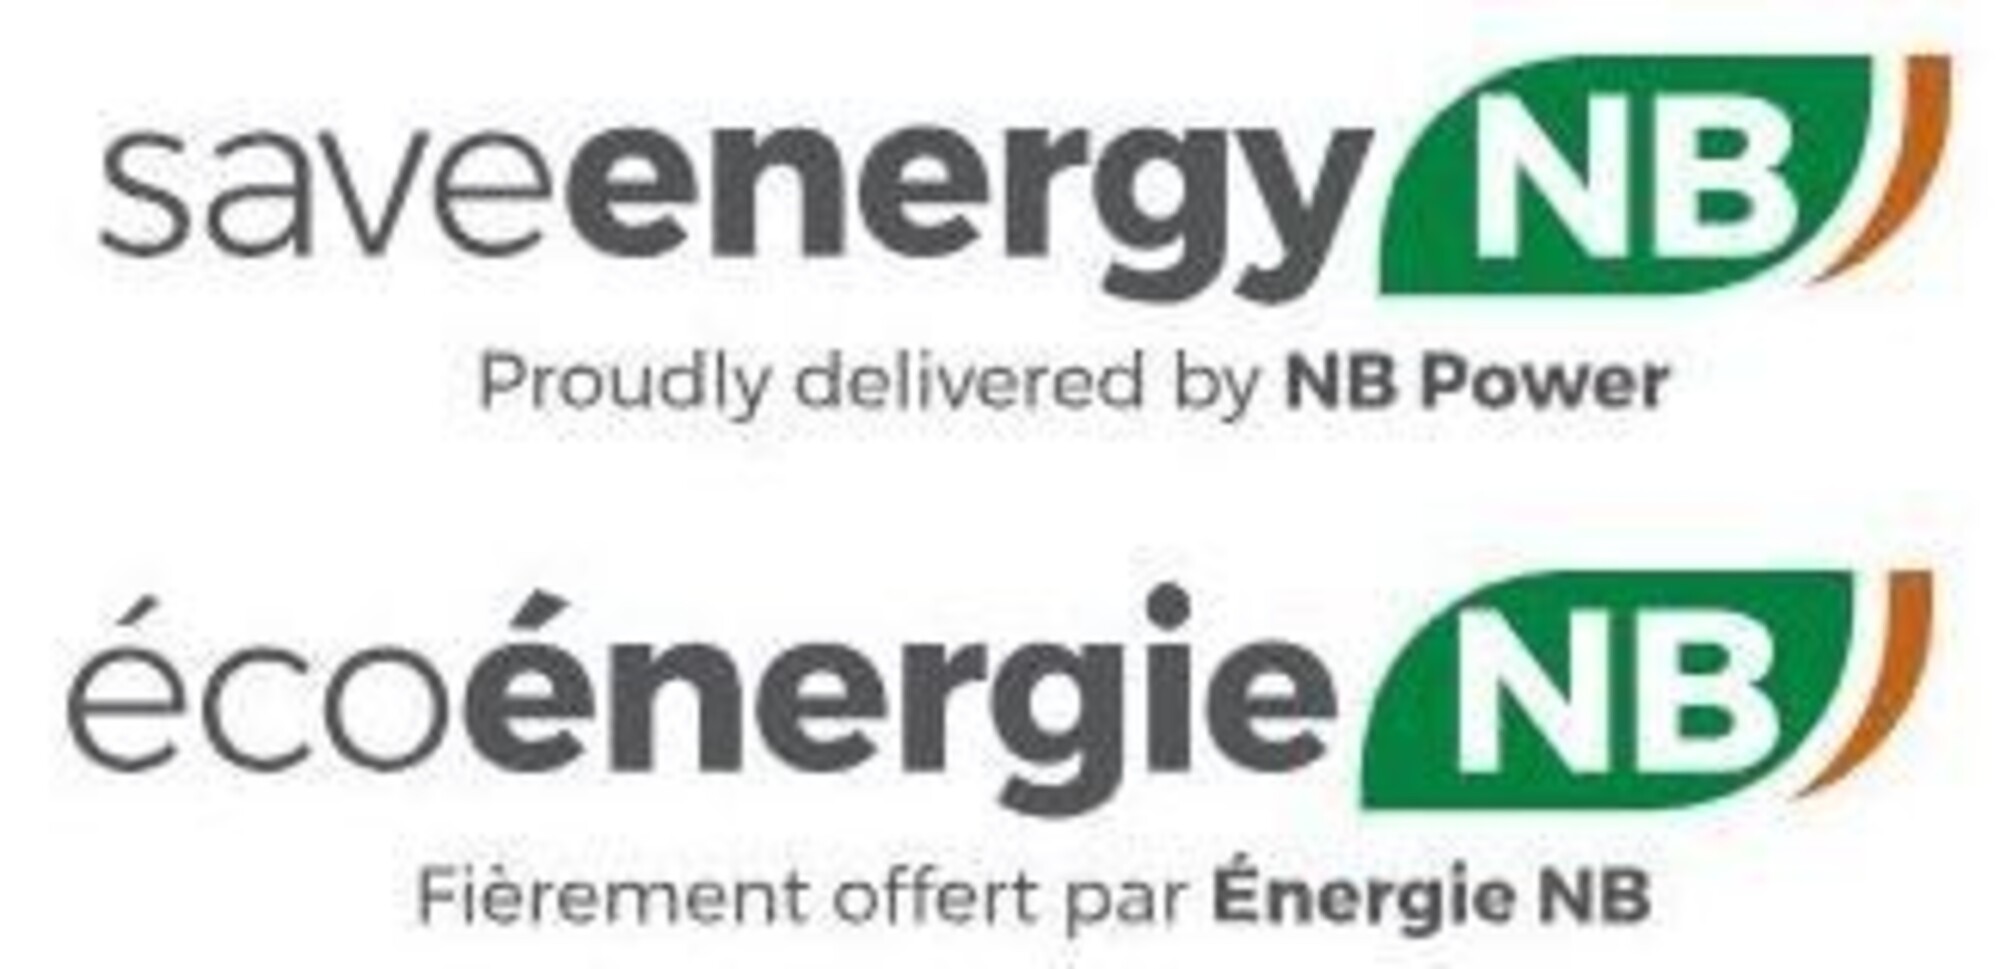 Check out our new energy efficiency program today!